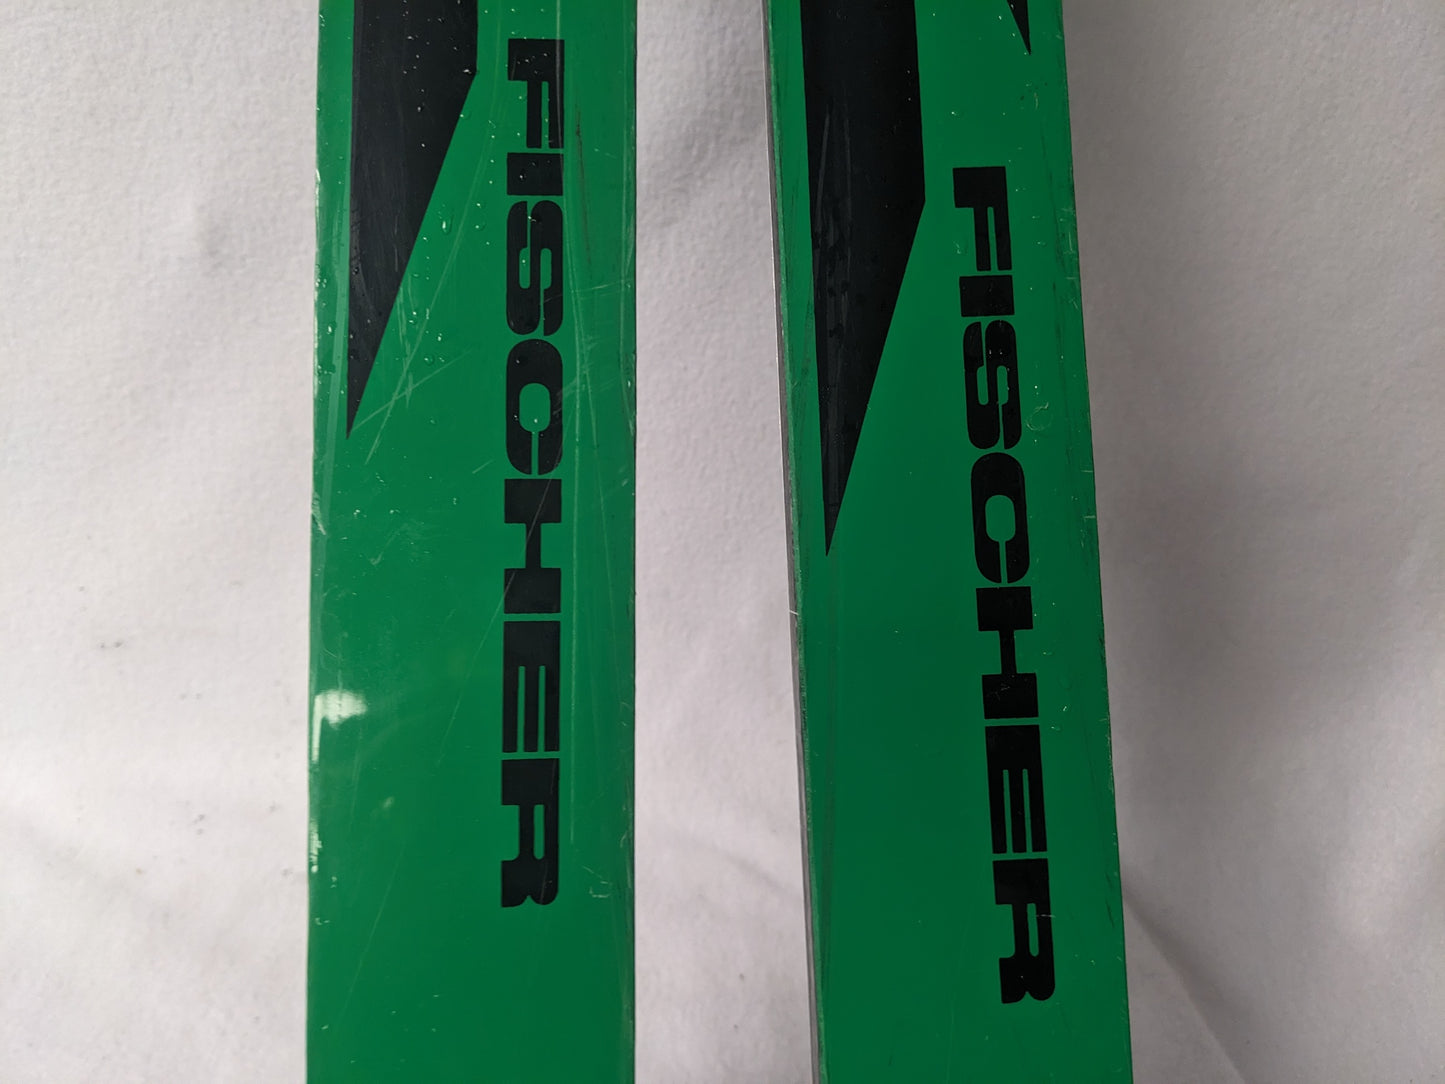 Fischer Europa Cross Country XC Skis w/75 mm 3 Pin Bindings Size 215 Cm Color Green Condition Used